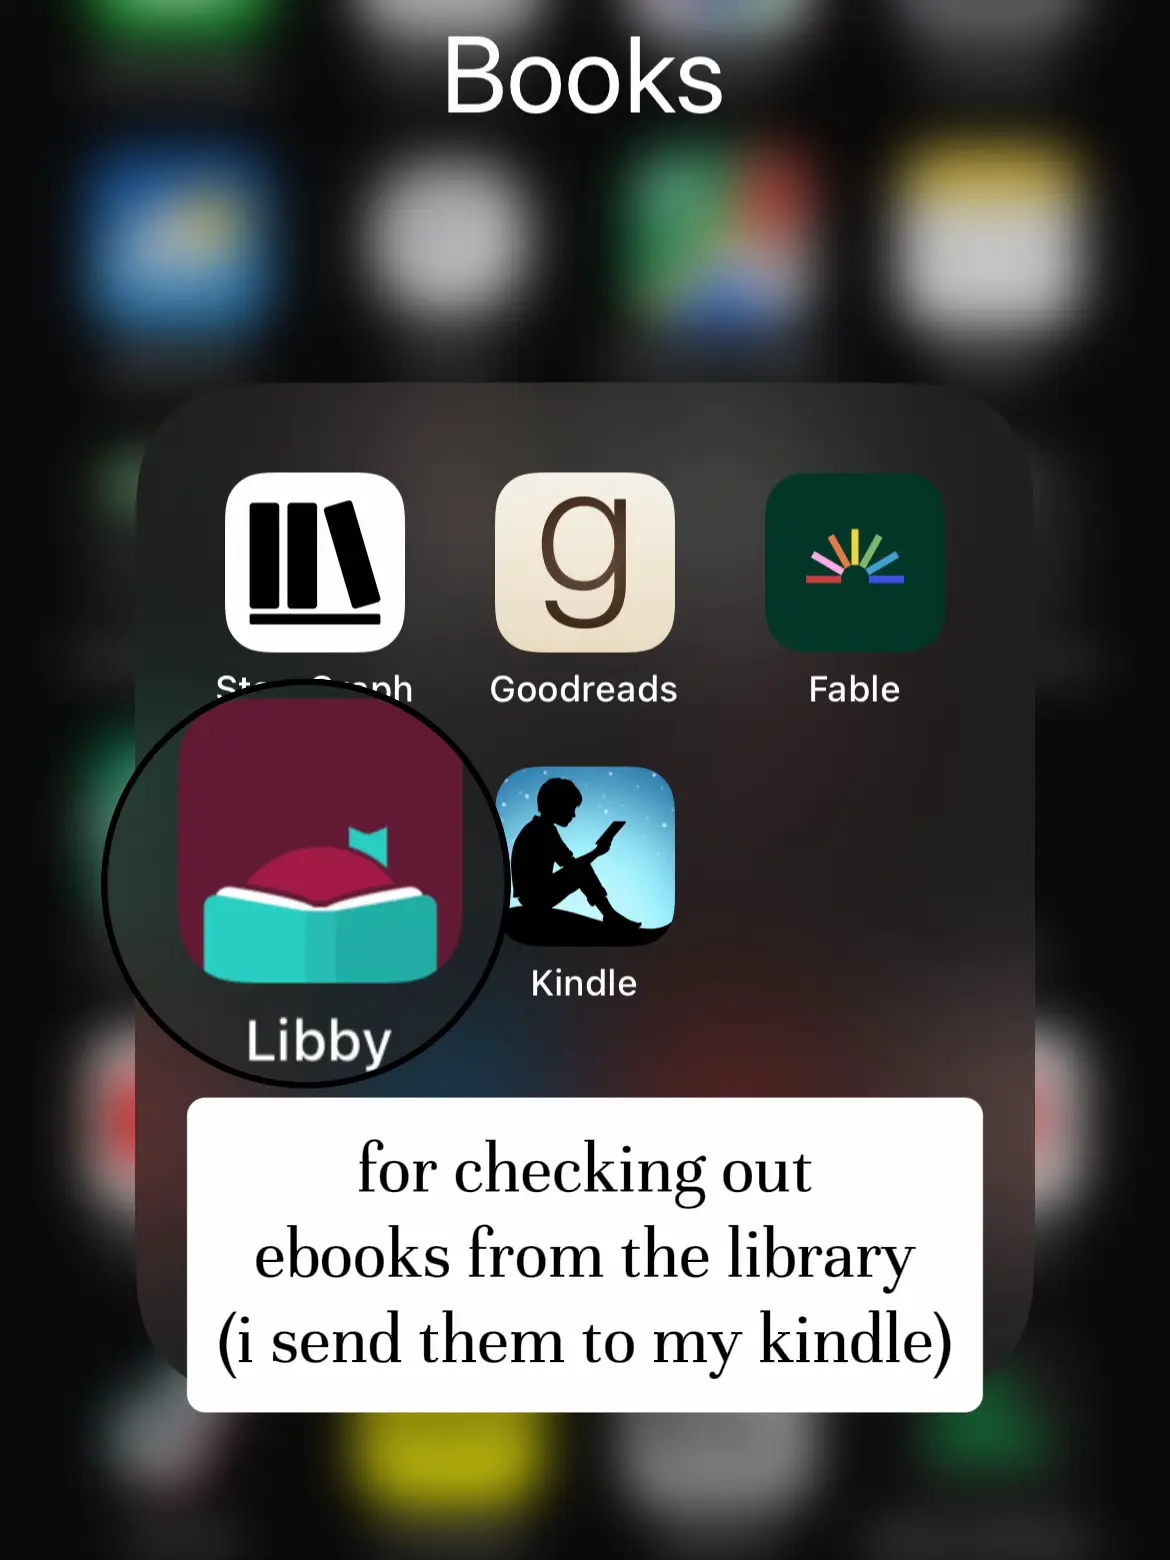  A screen showing a list of books for checking out.